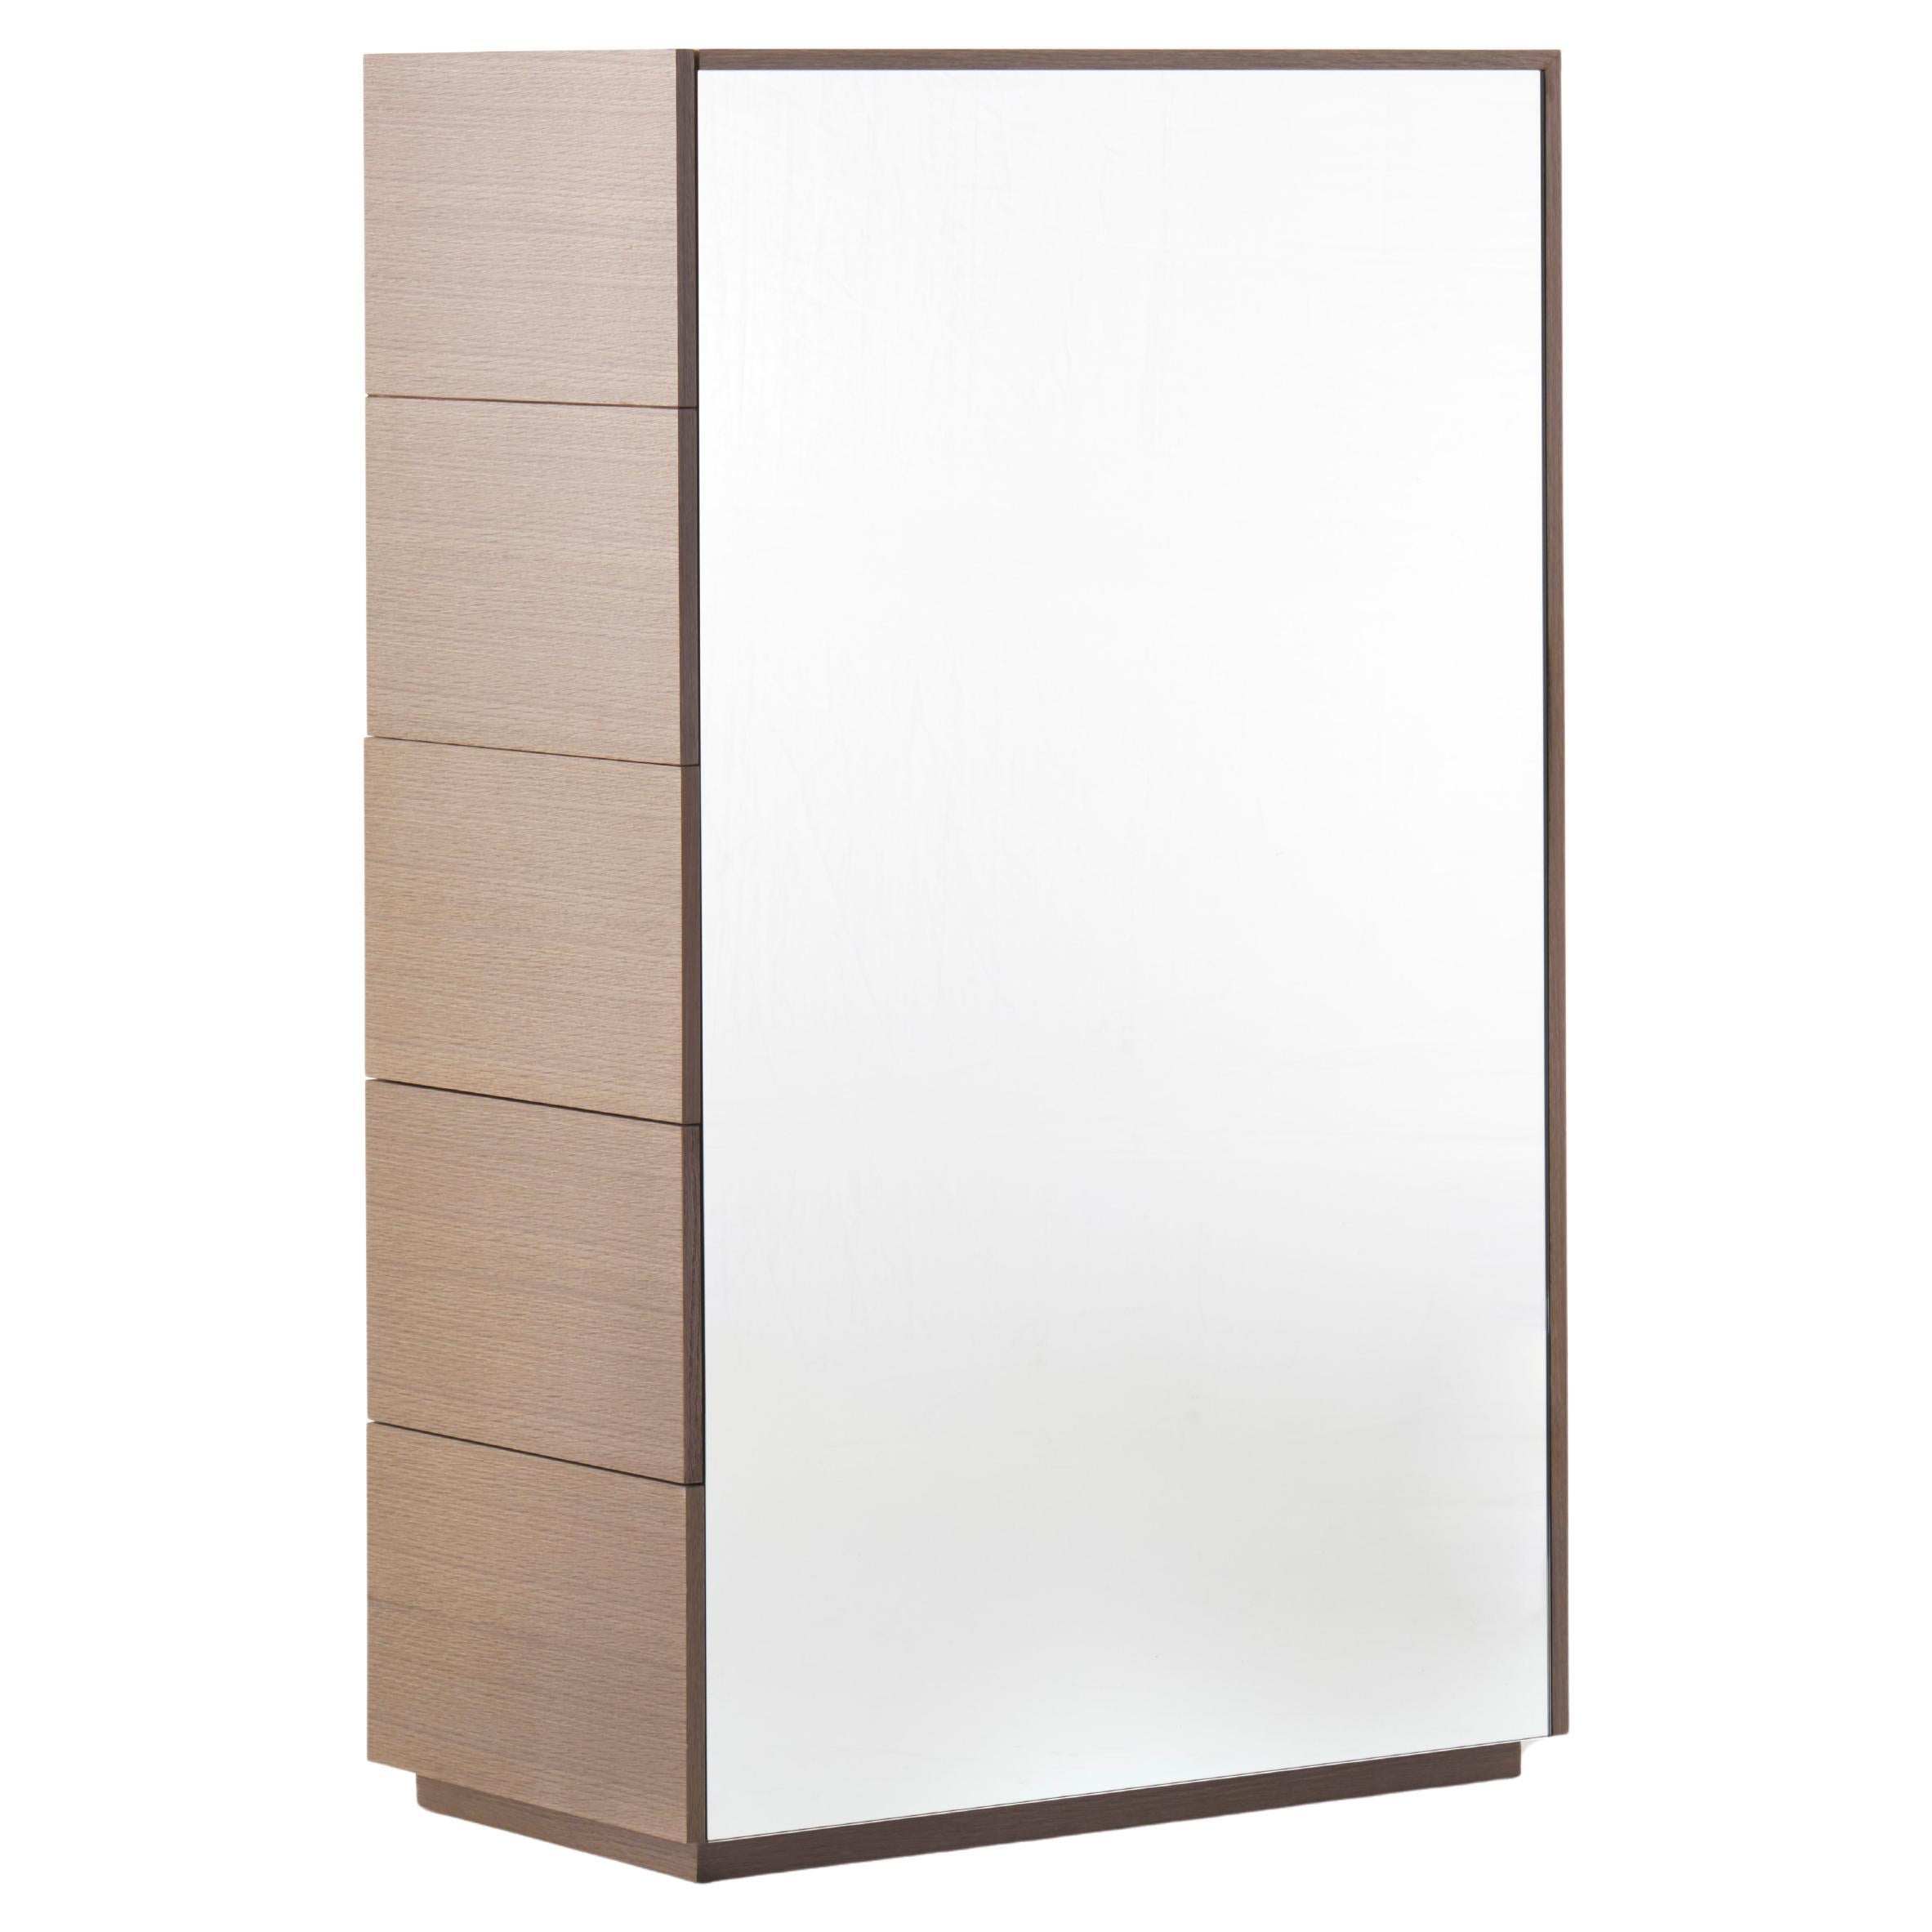 Mirrored Dressing Cabinet, Cerused Oak and MIrrored Glass